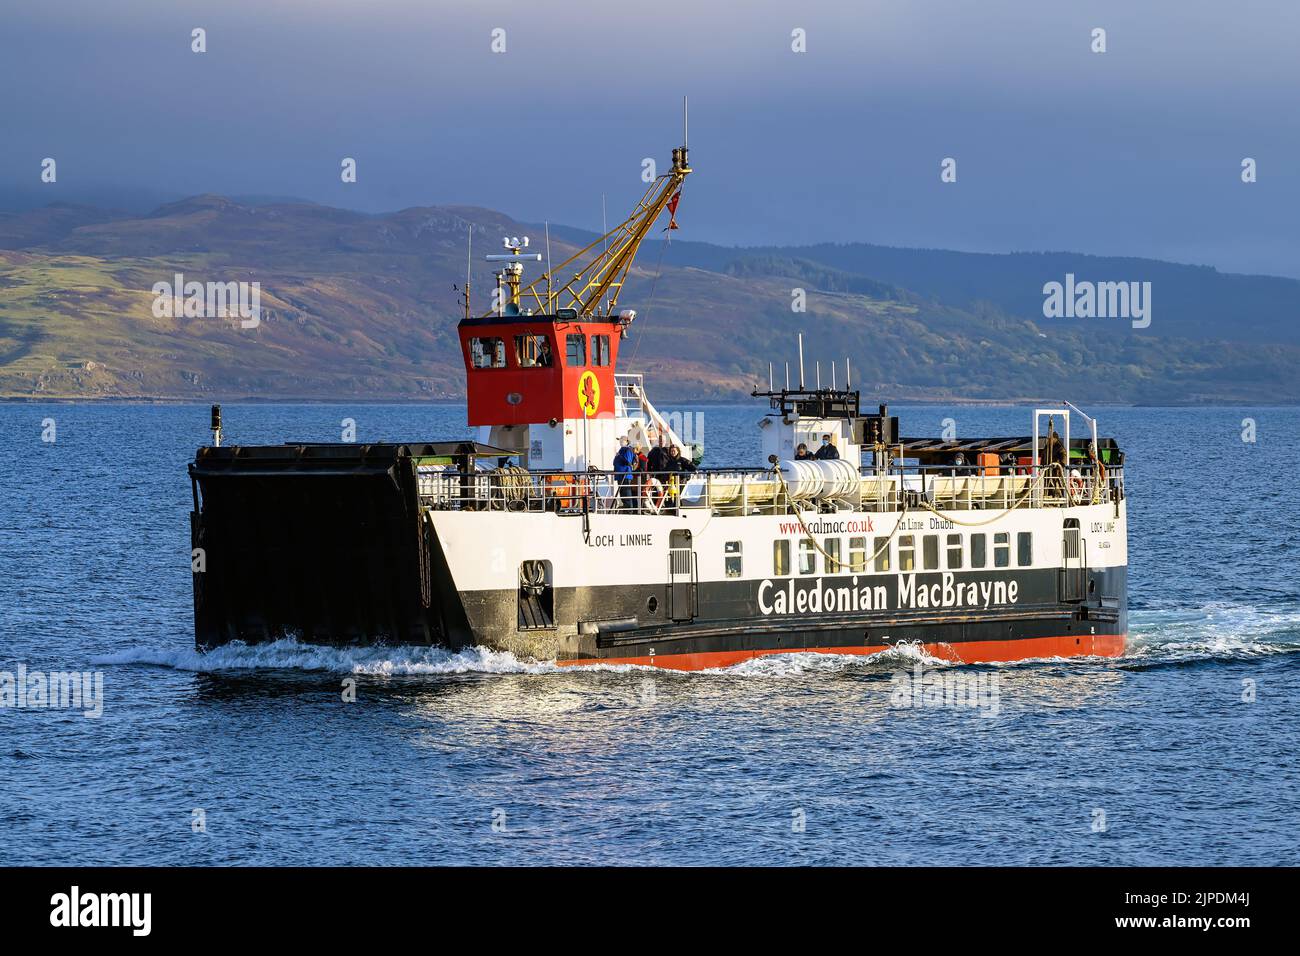 Loch Linnie is a relief ferry operated by Caledonian MacBrayne on various  inter-island and mainland routes in Scotland - October 2021. Stock Photo